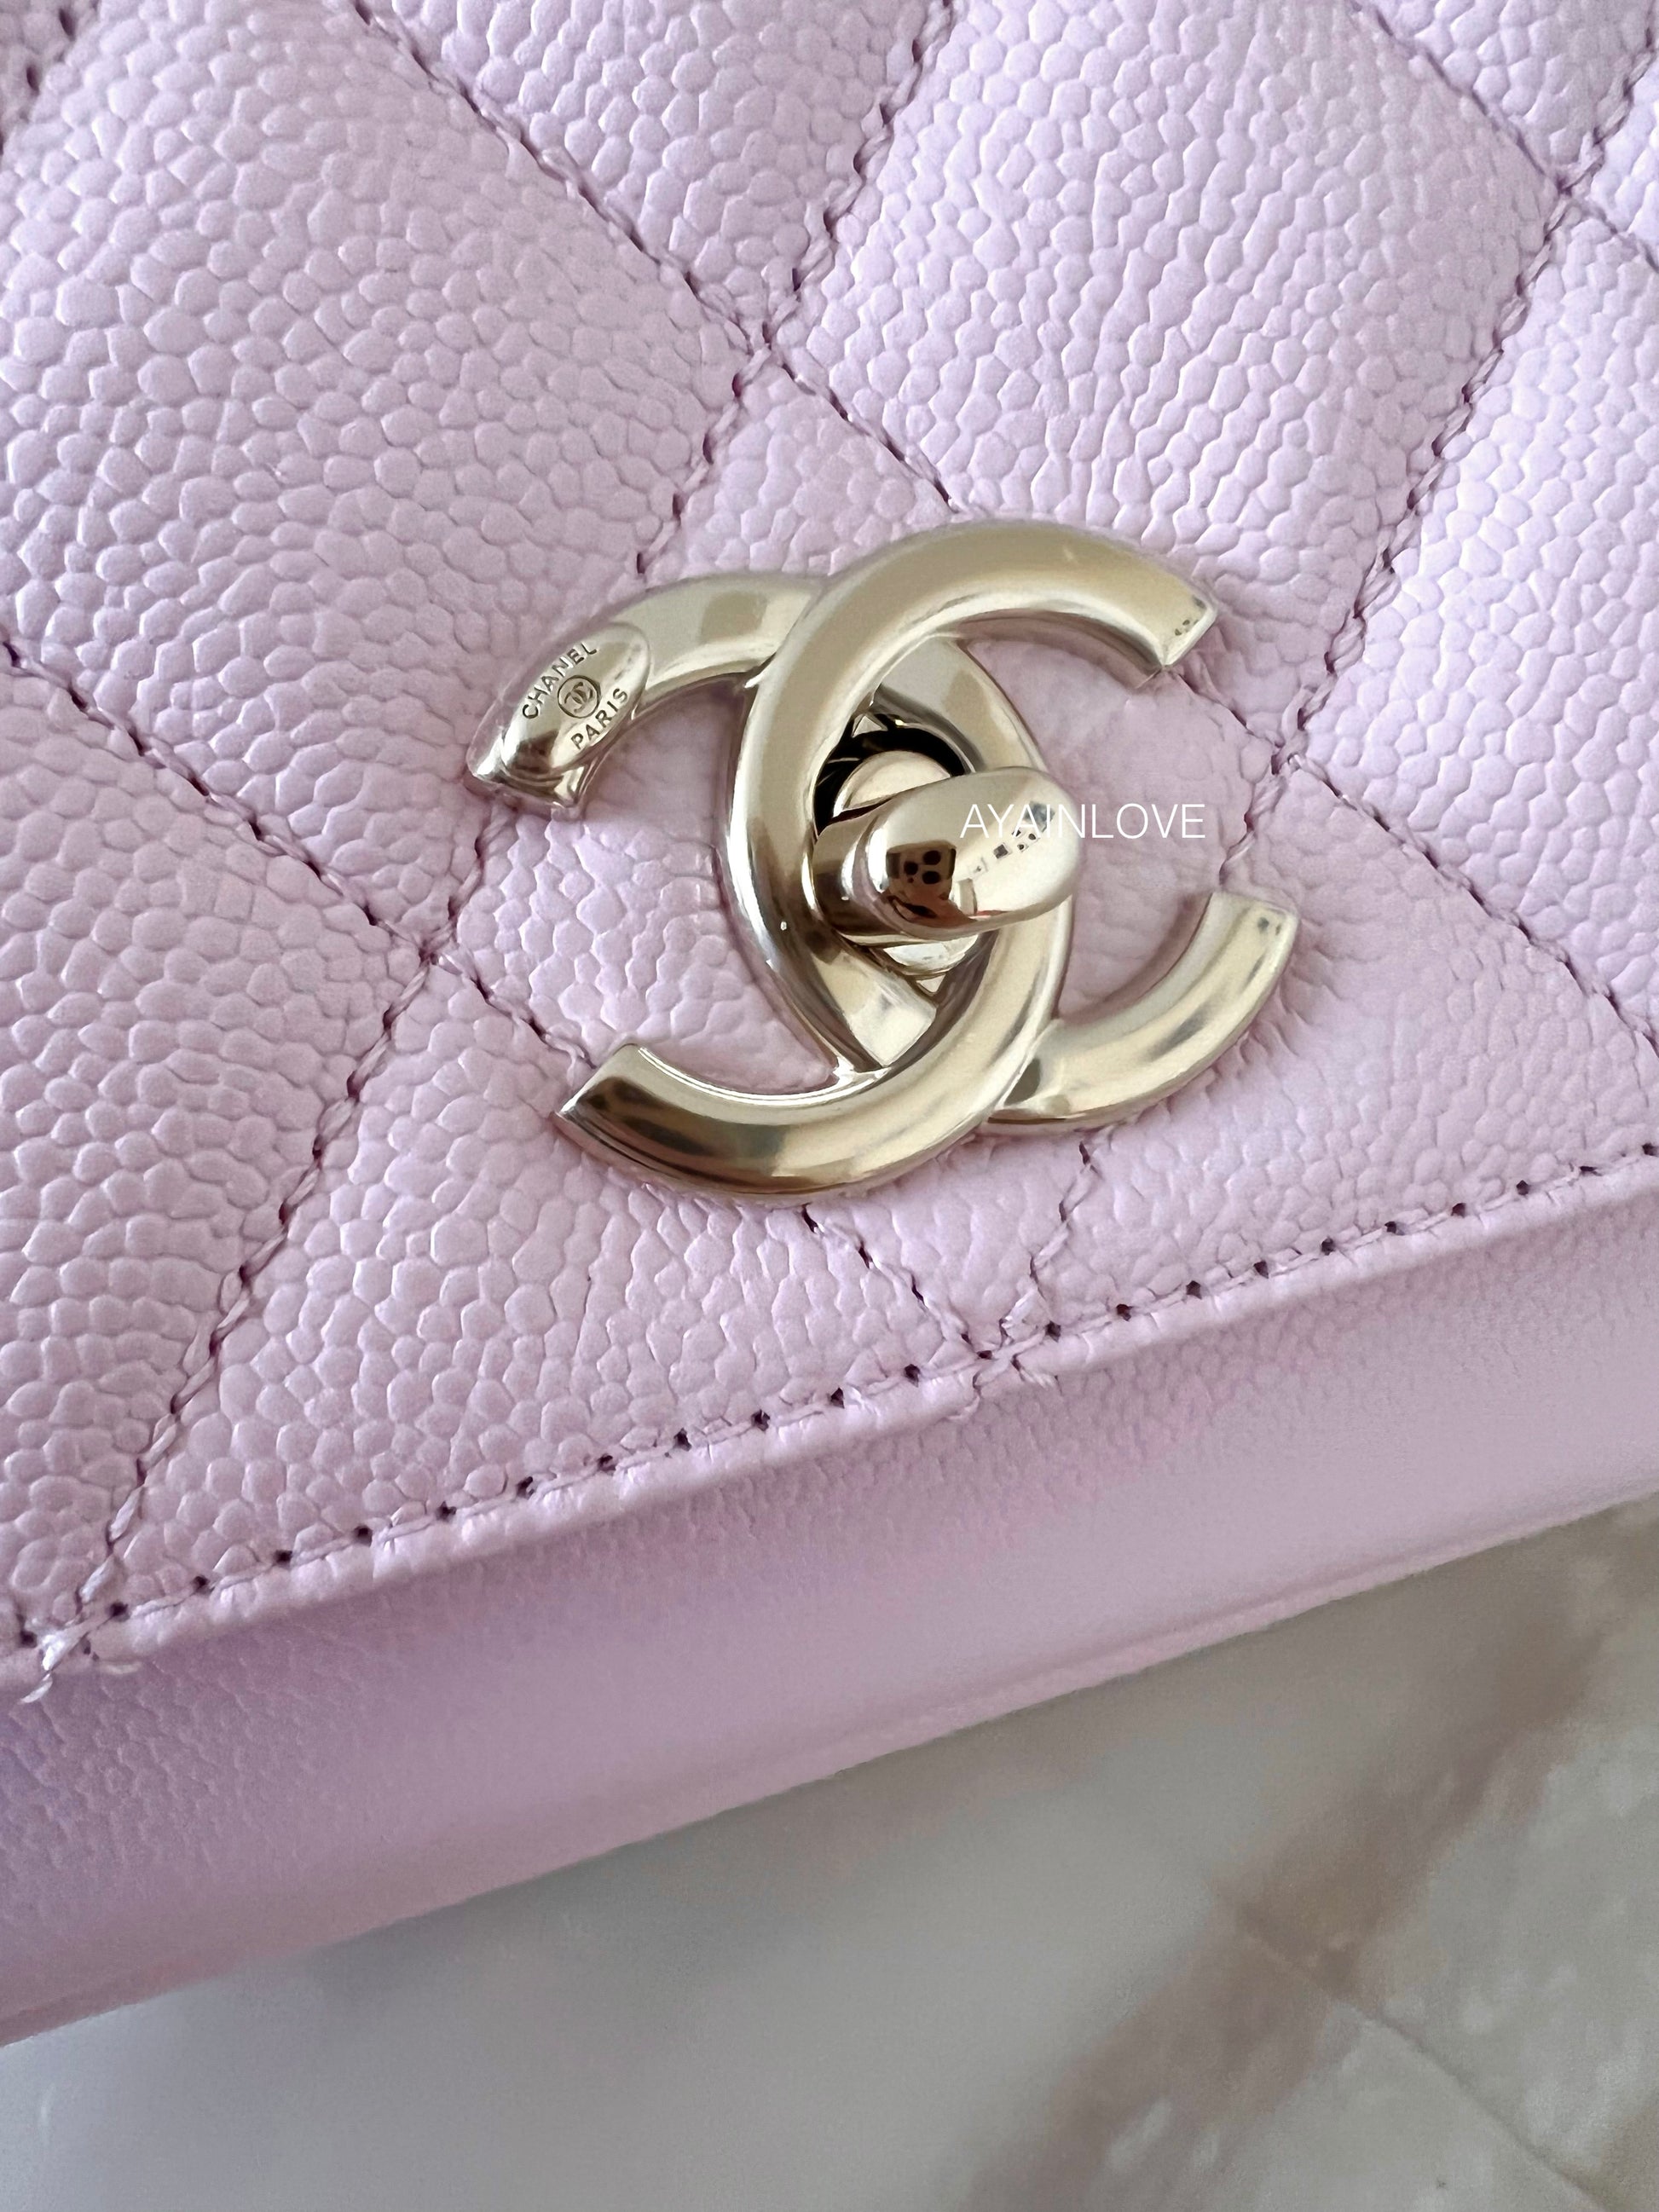 Chanel Quilted Business Affinity Backpack Pink Caviar Gold Hardware